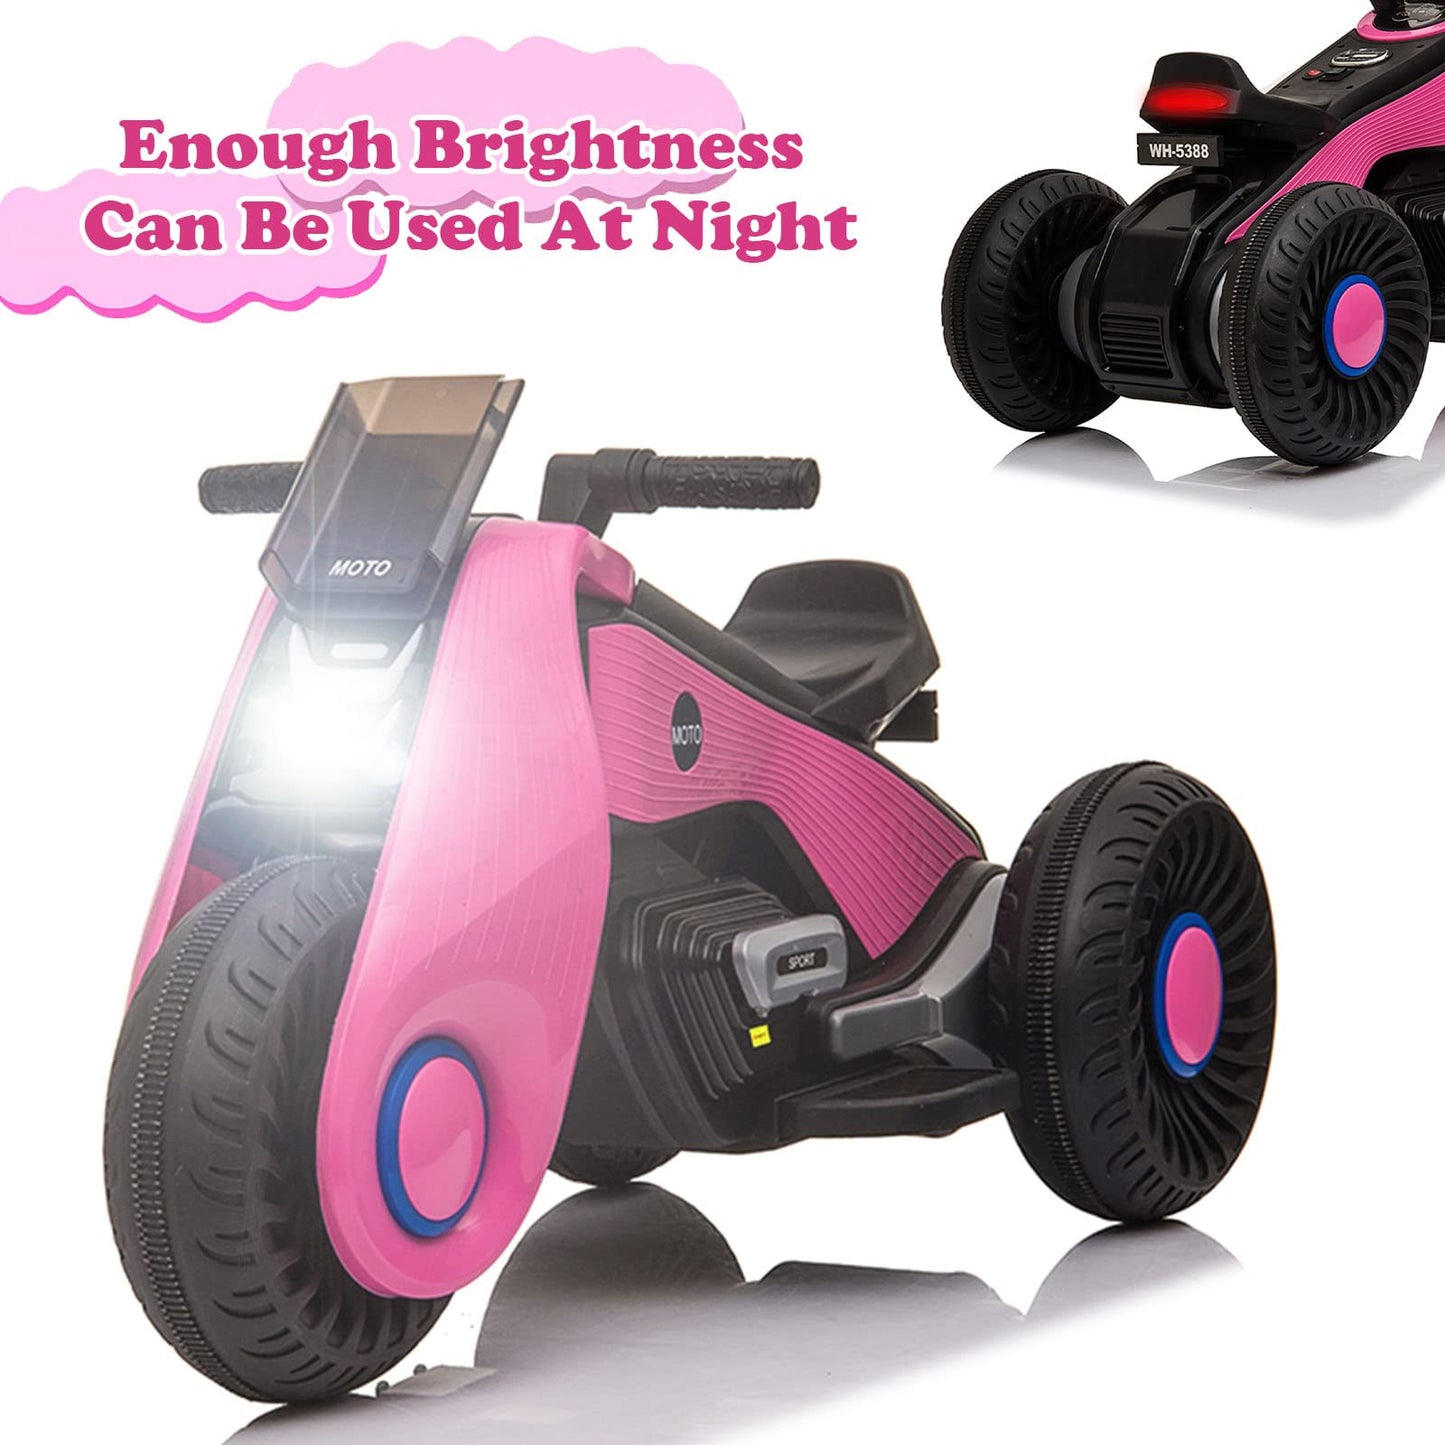 BELANITAS Kids Motorcycle Ride On, 3 Wheel Electric for Over Years Old, Double Drive Toddler with Music Player and Light, Motor Boys & Girls to on, Pink, Pink(motorcycle)